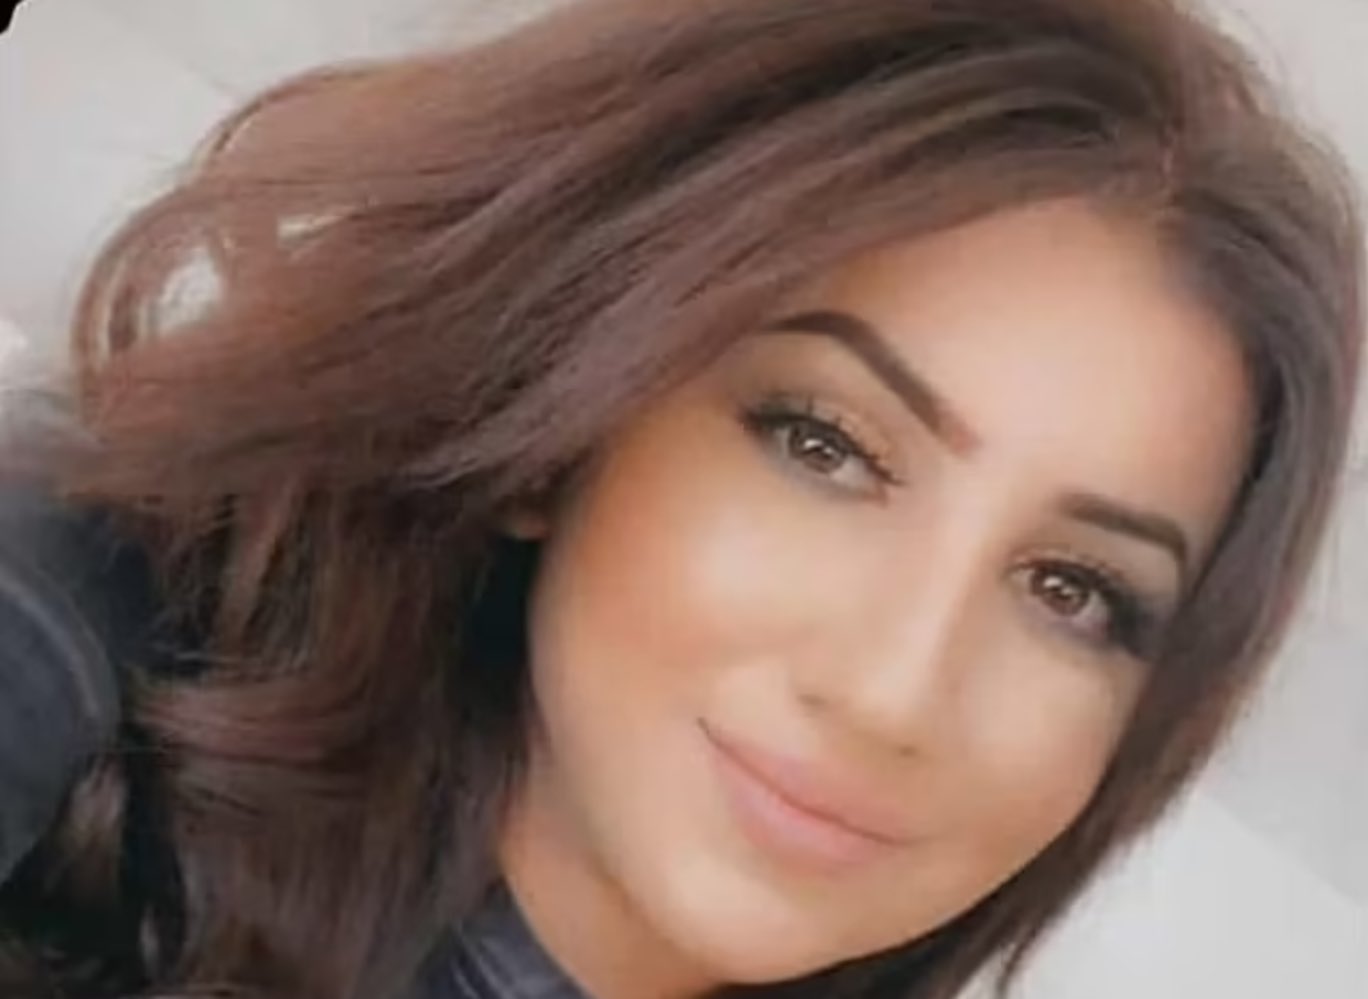 Who is Shahraban K? 23-year-old German woman of Iraqi descent who murdered doppelganger to start new life